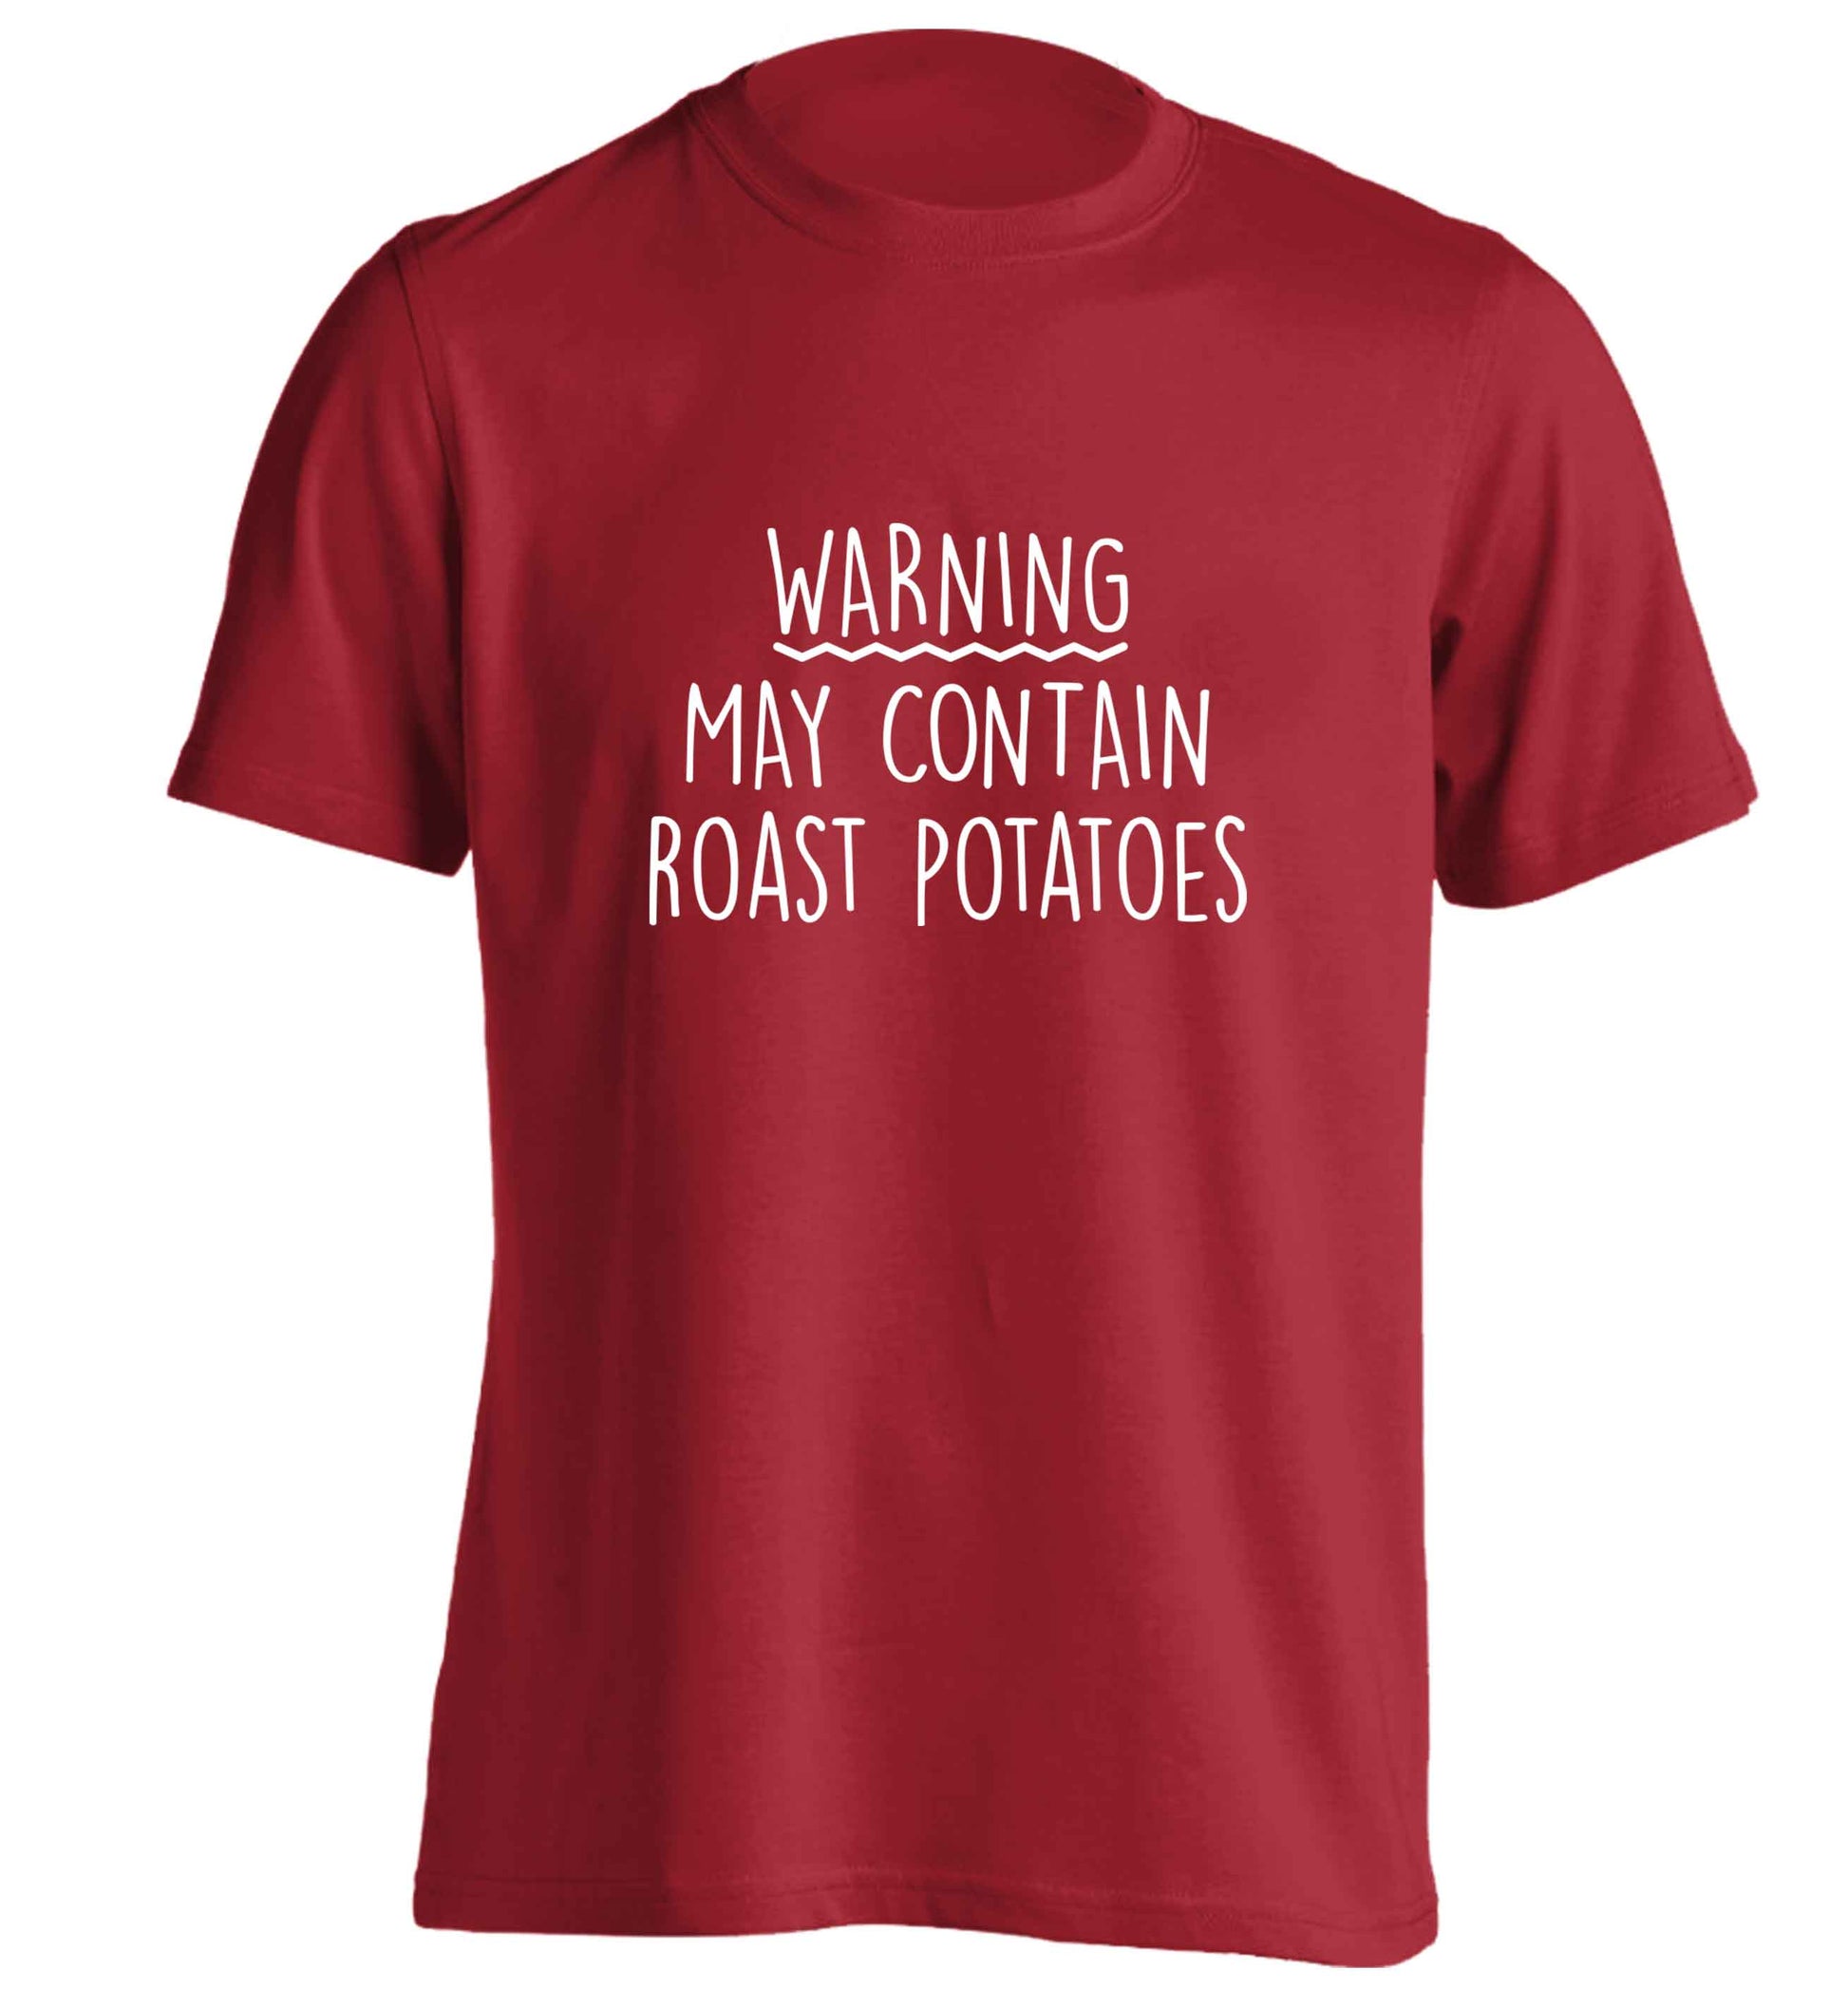 Warning may containg roast potatoes adults unisex red Tshirt 2XL